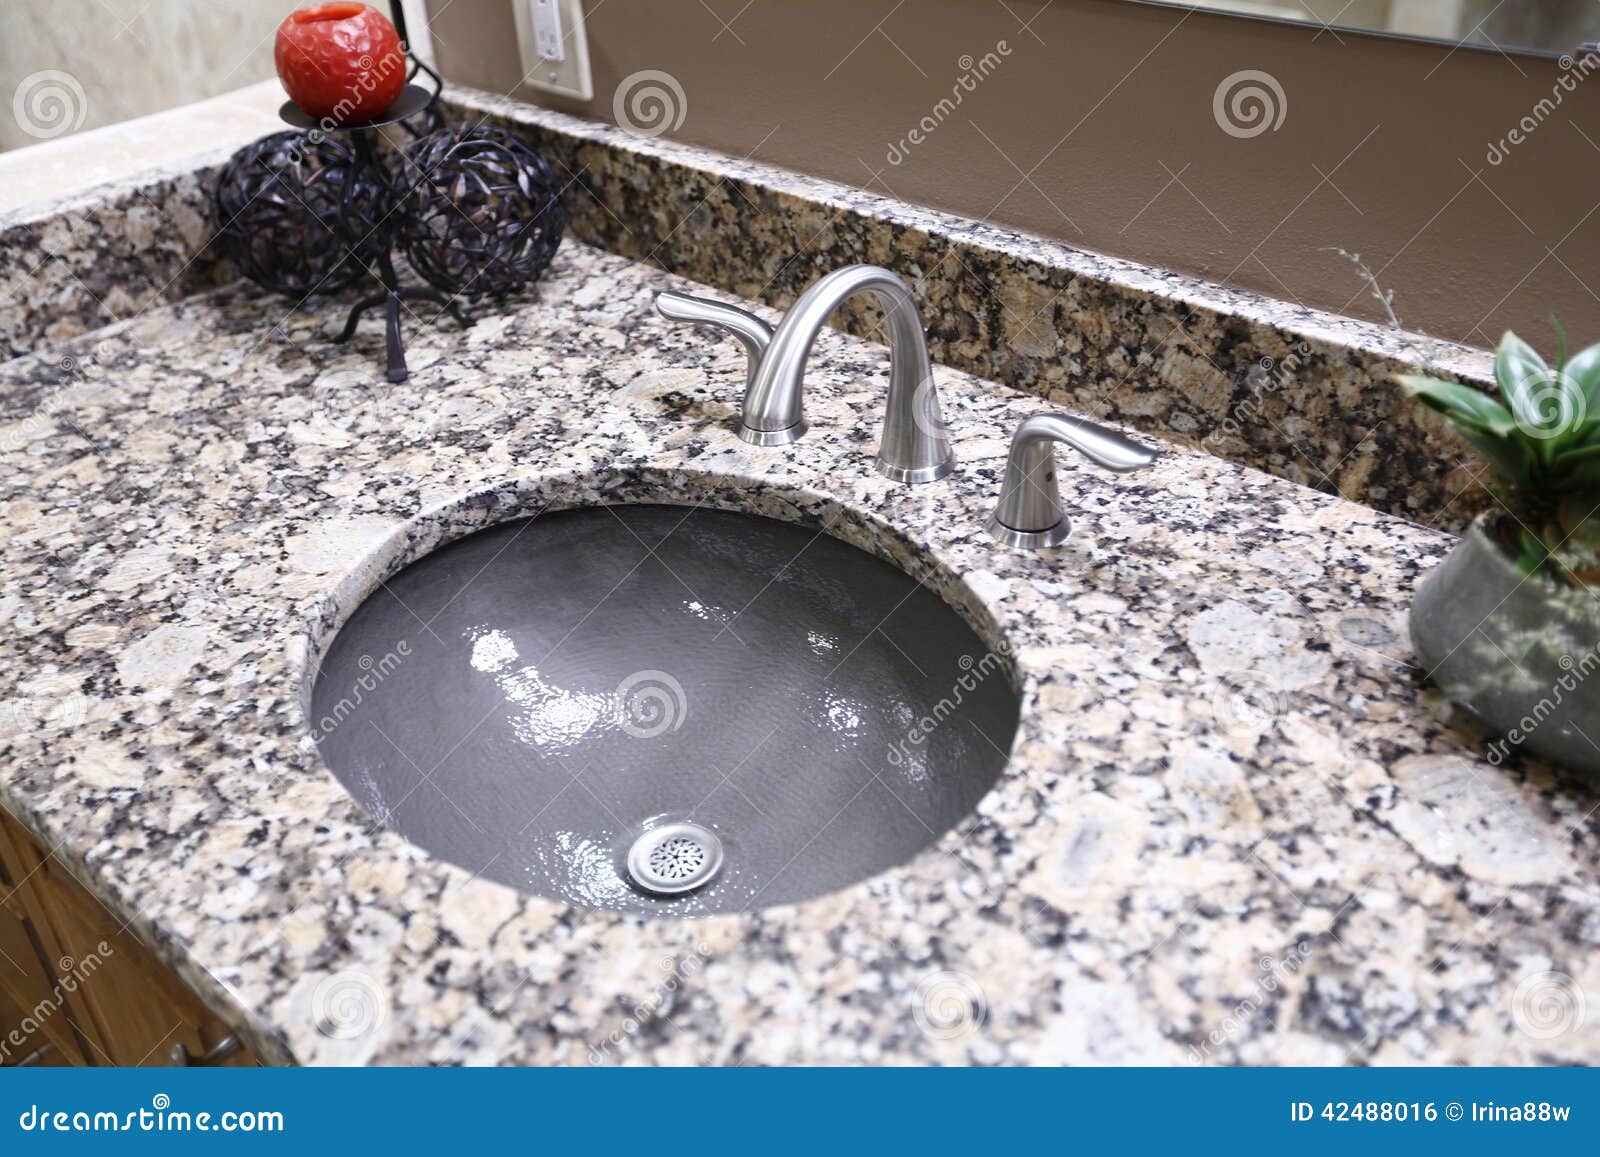 Grey Round Sink With Granite Counter Stock Photo Image Of